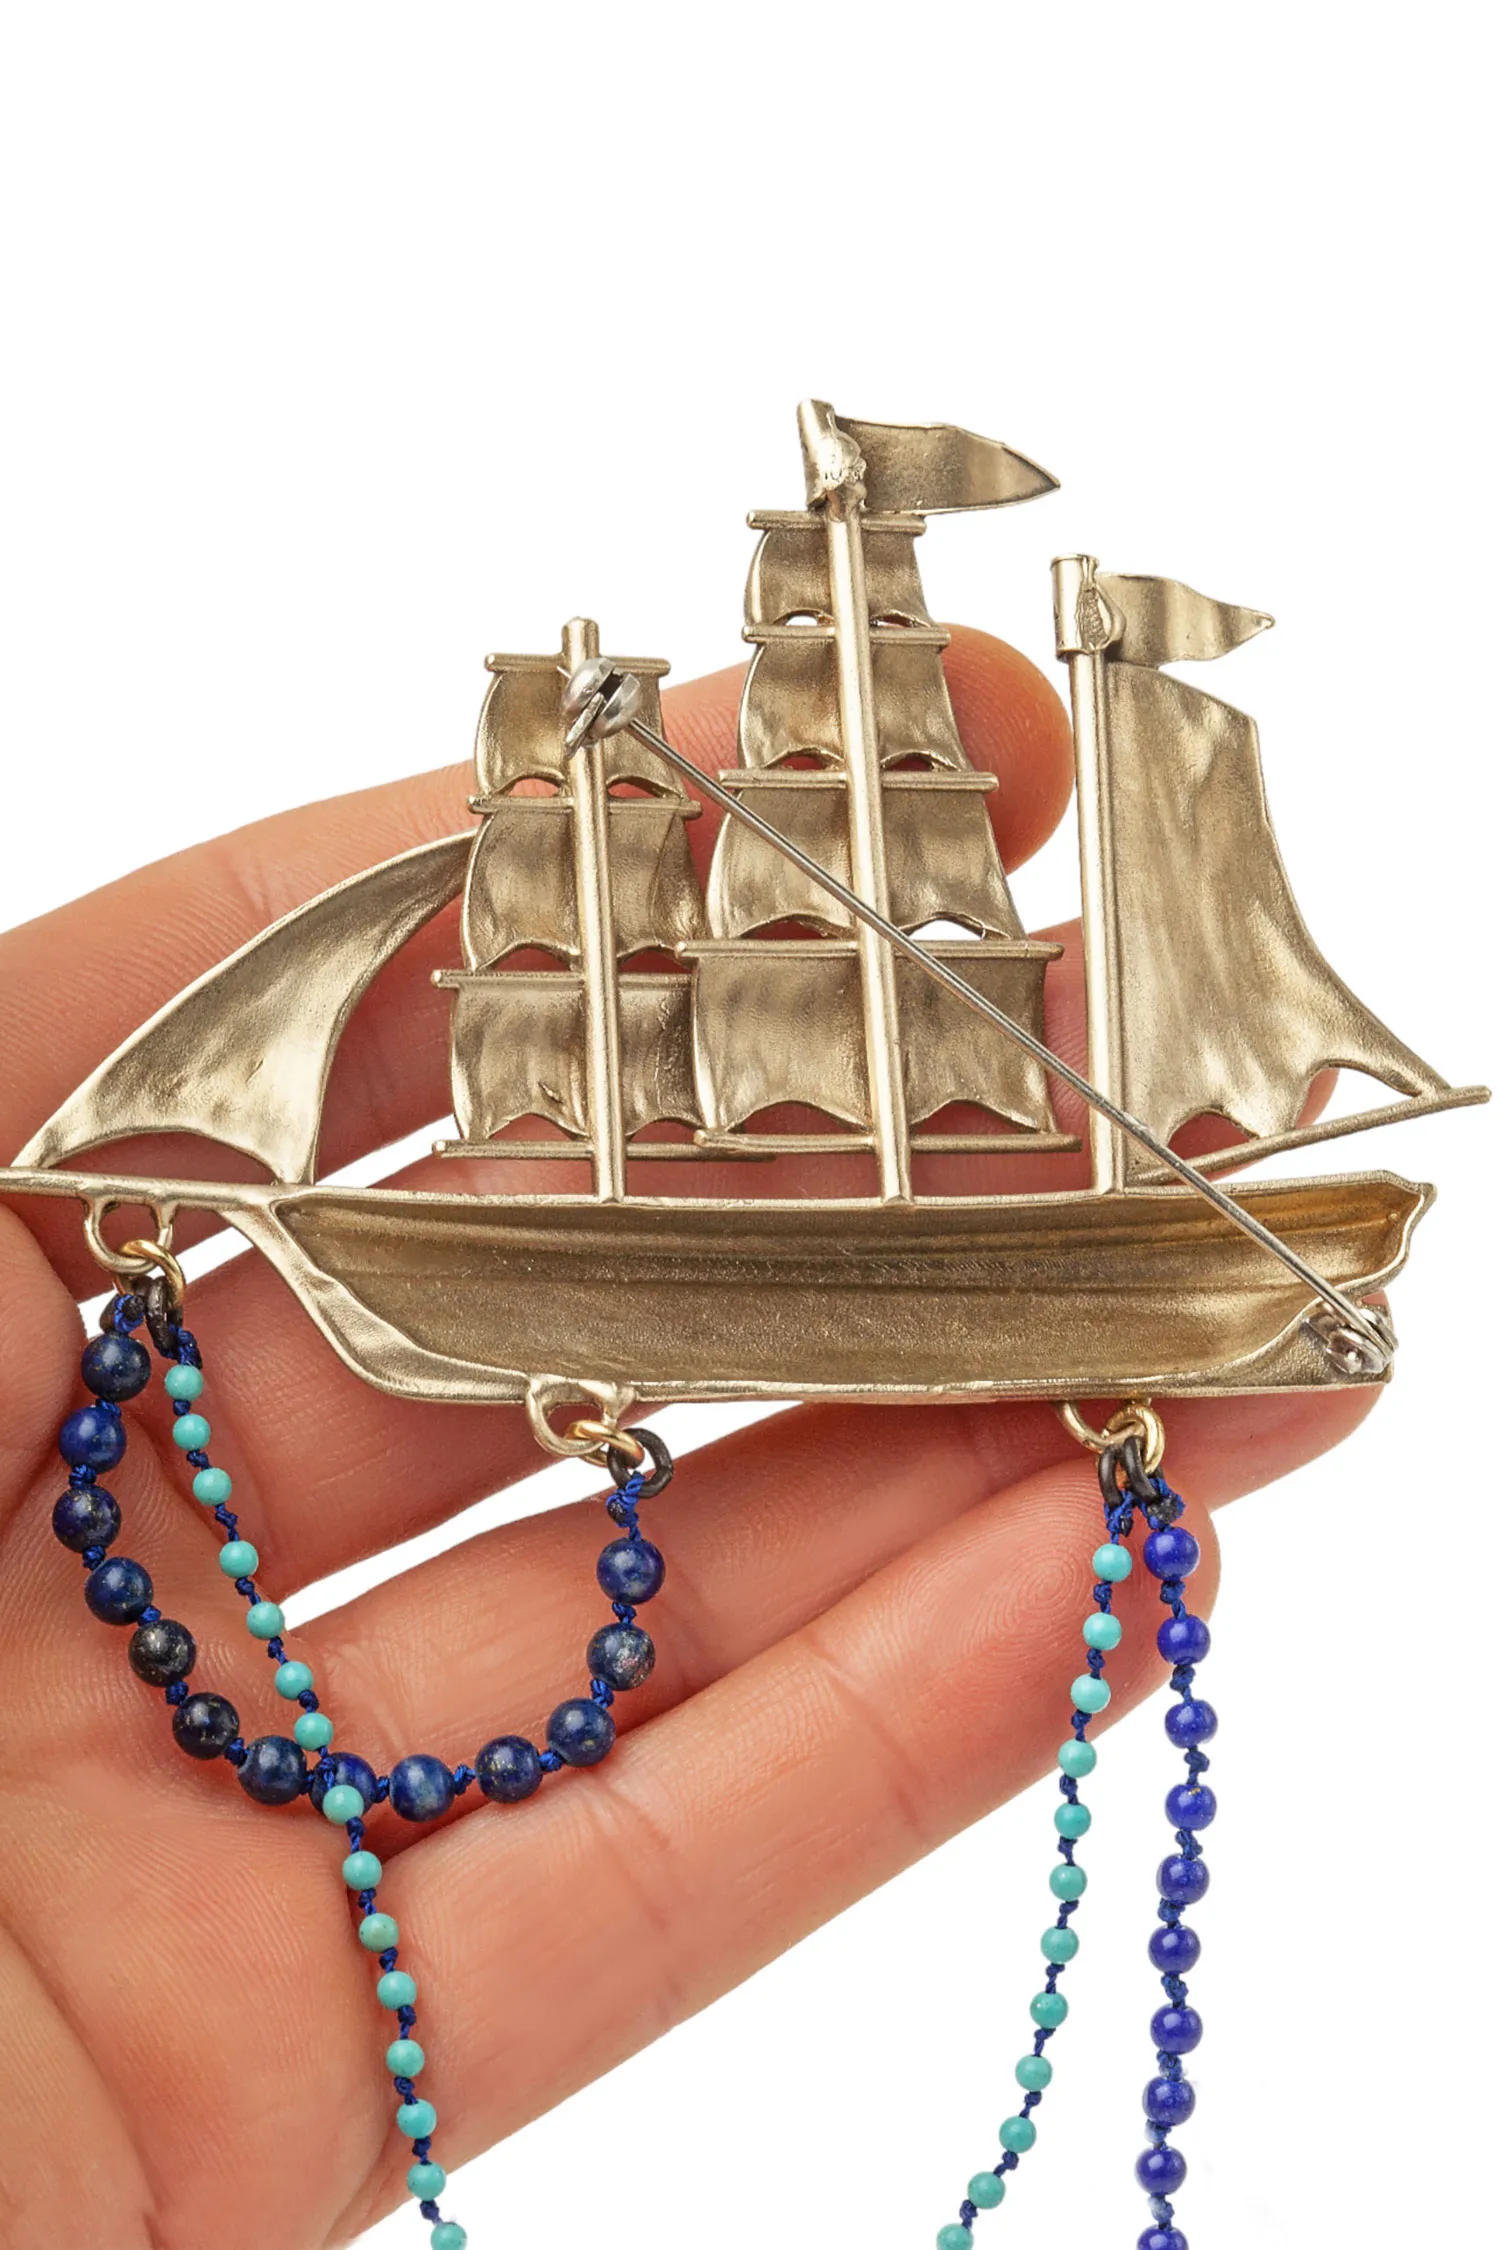 Handmade Jewellery | Sailing boat bronze brooch combined with lapis lazuli and quartz gallery 3